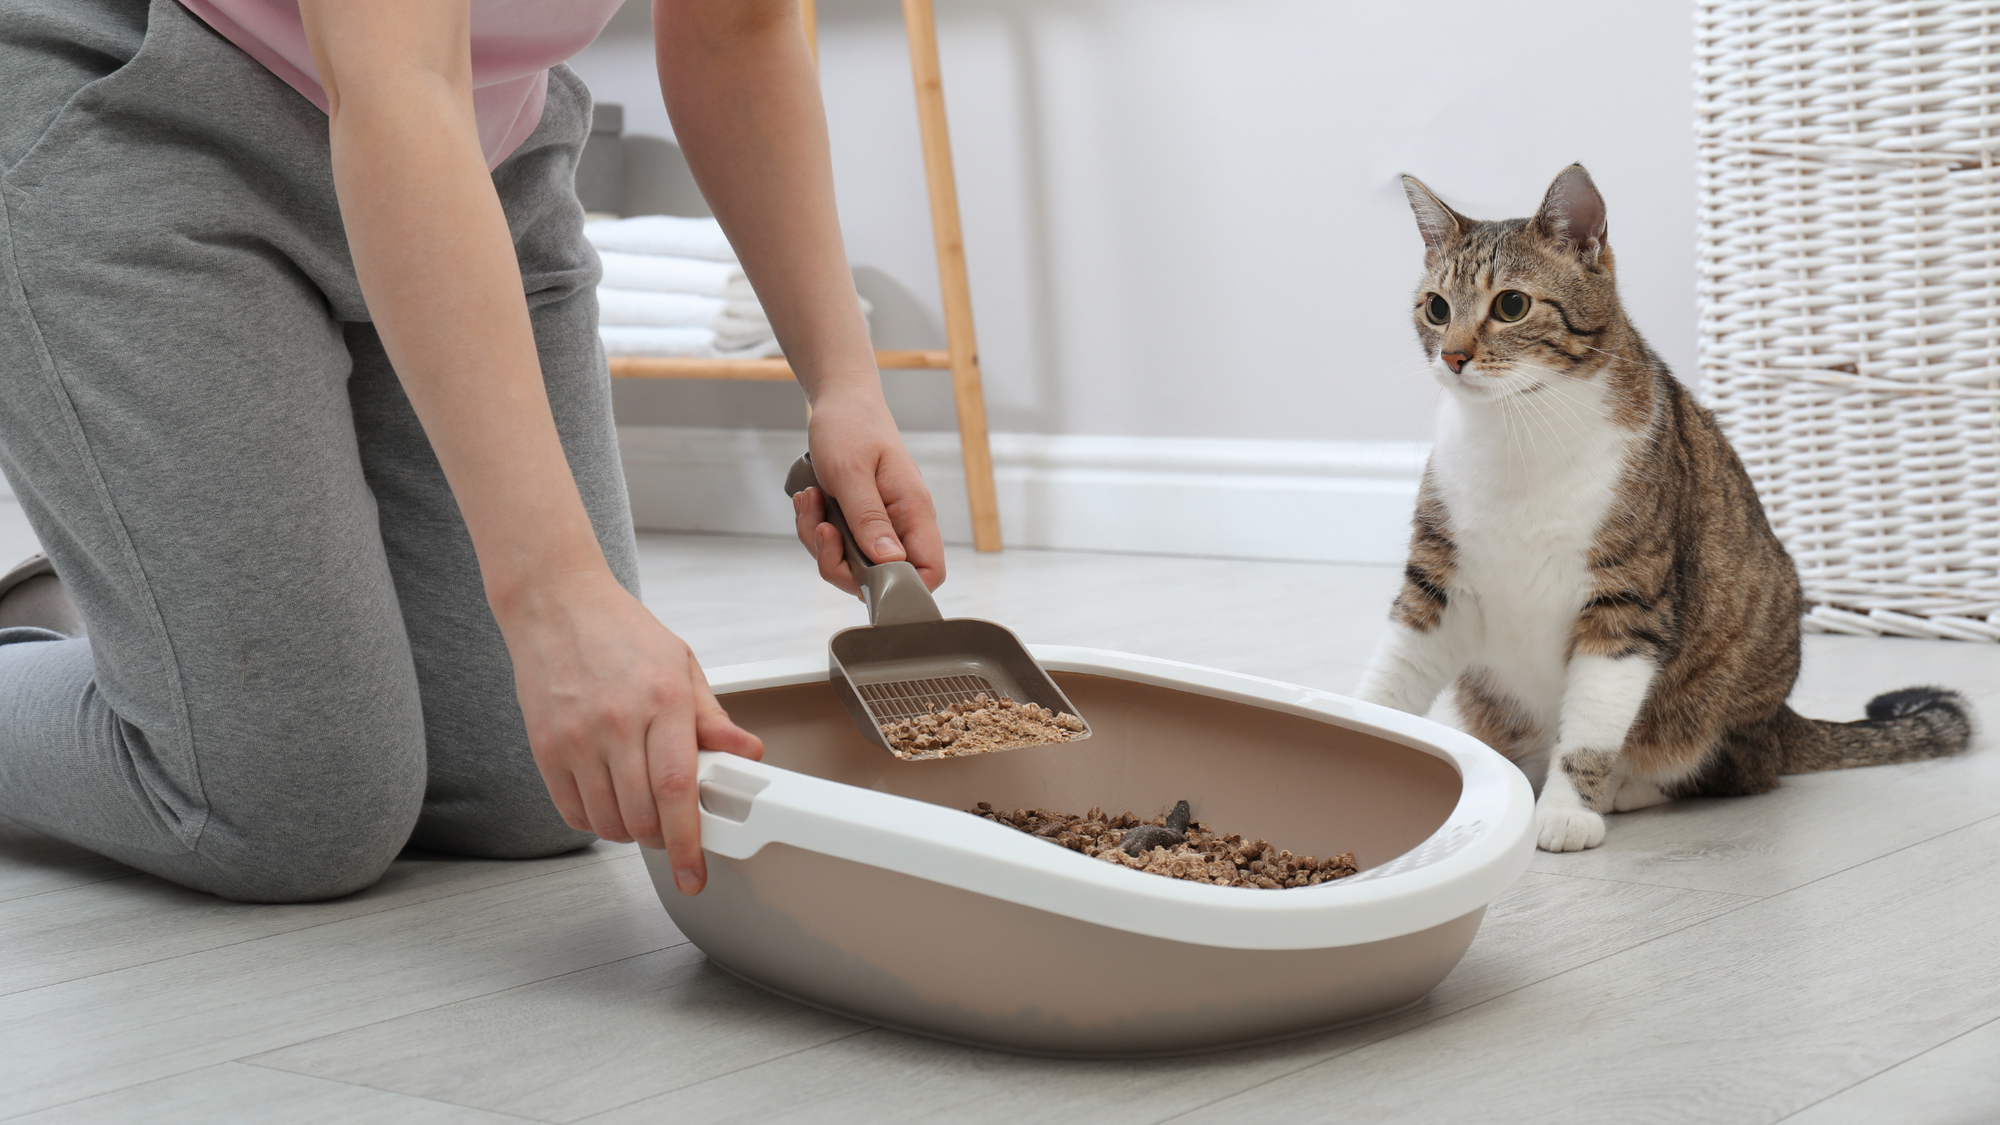 human scooping cat litter while cat watches